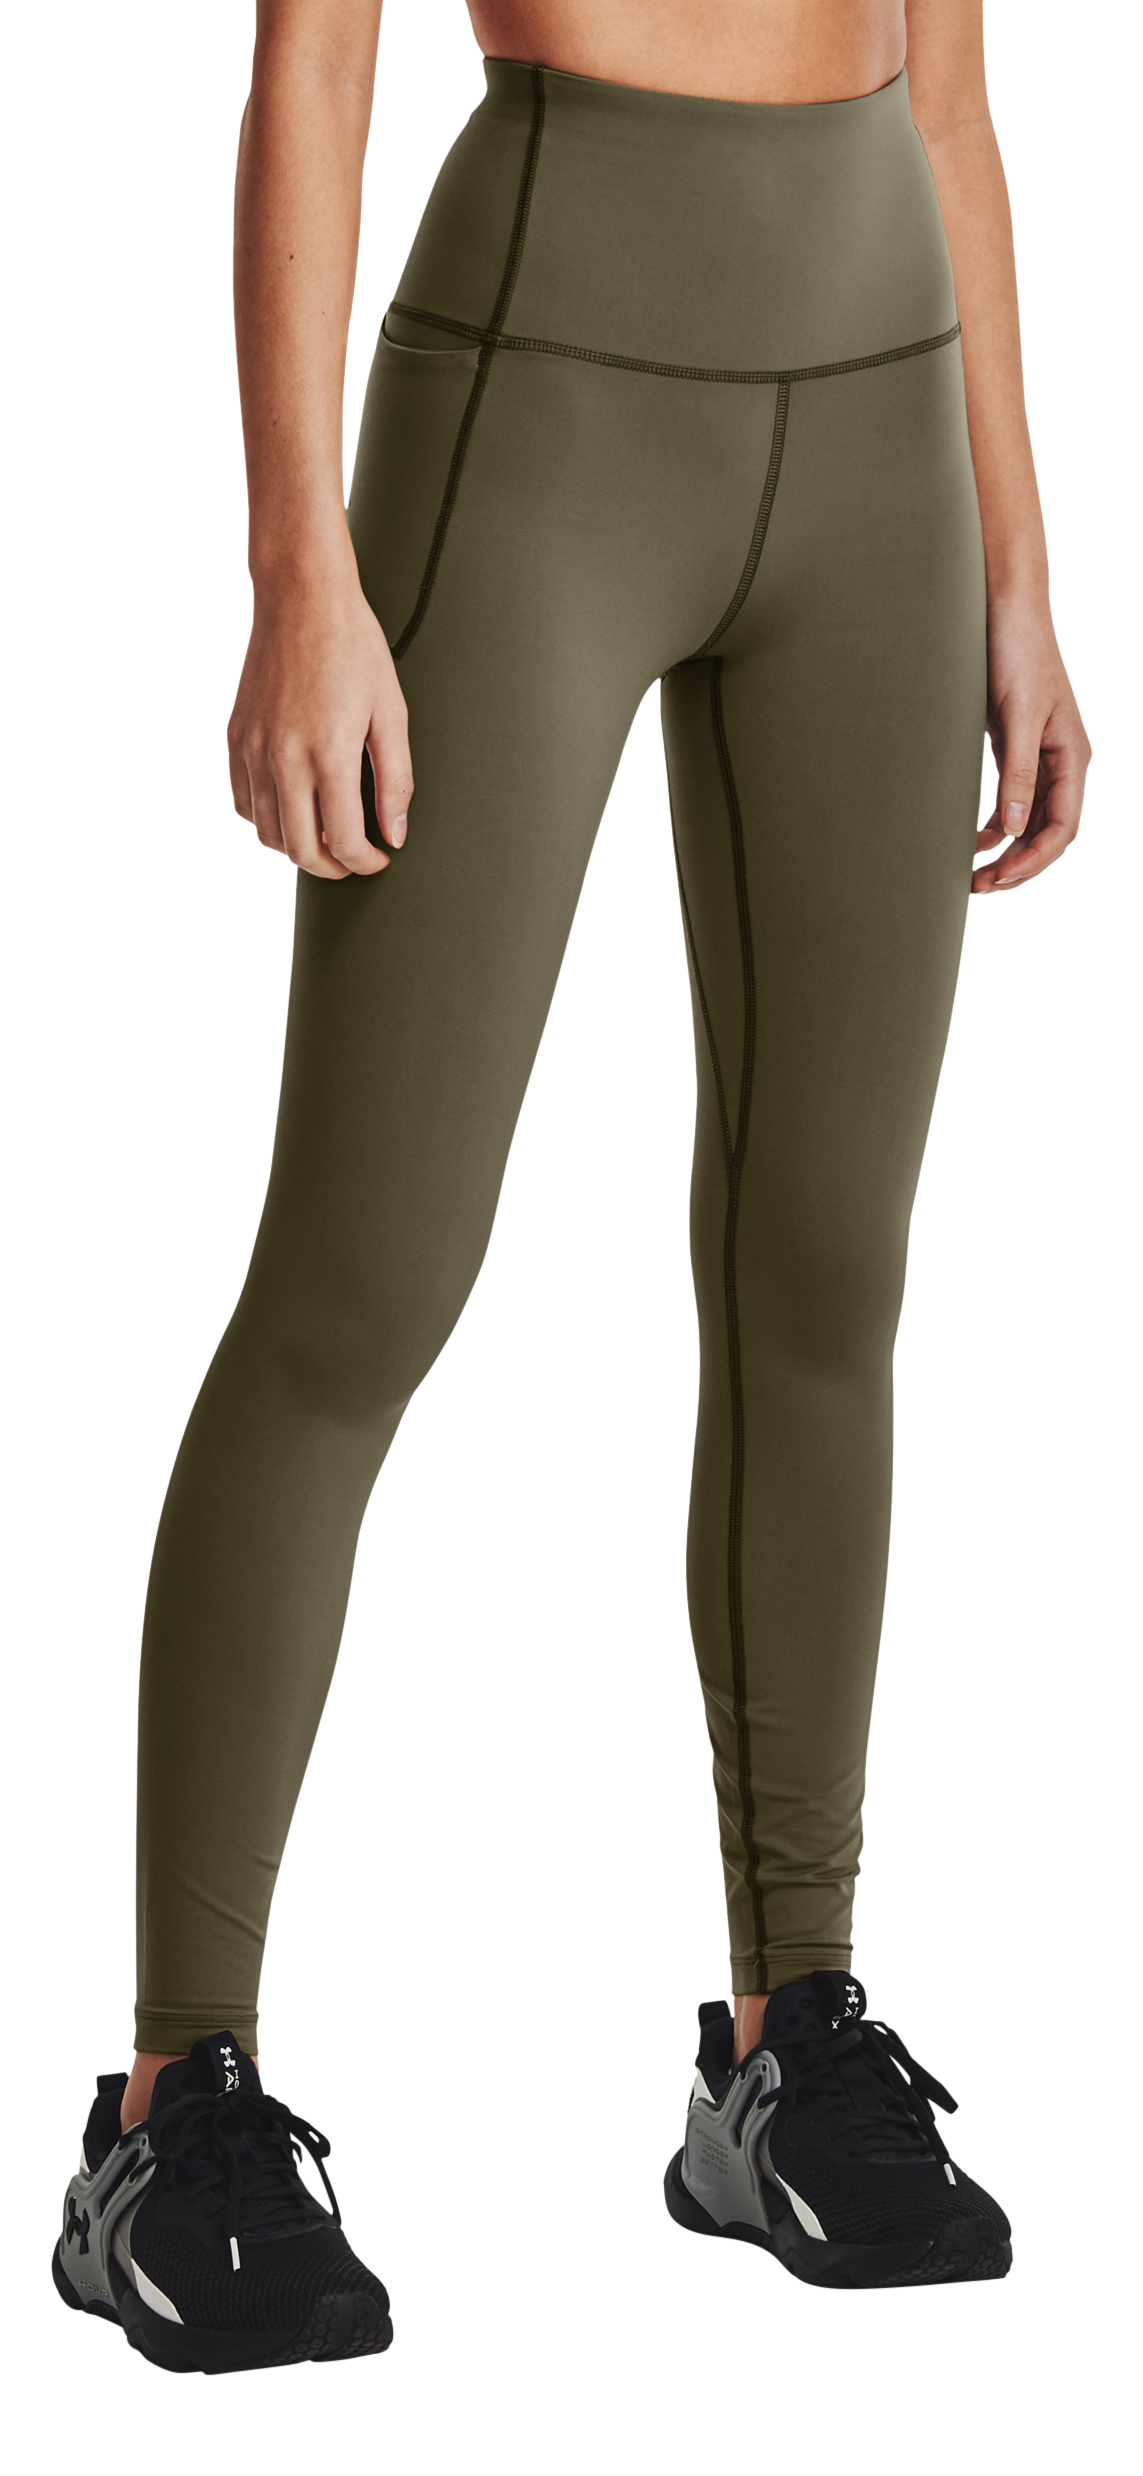 Under Armour Meridian Ultra High Rise Leggings for Ladies - Tent/Metallic Silver - L